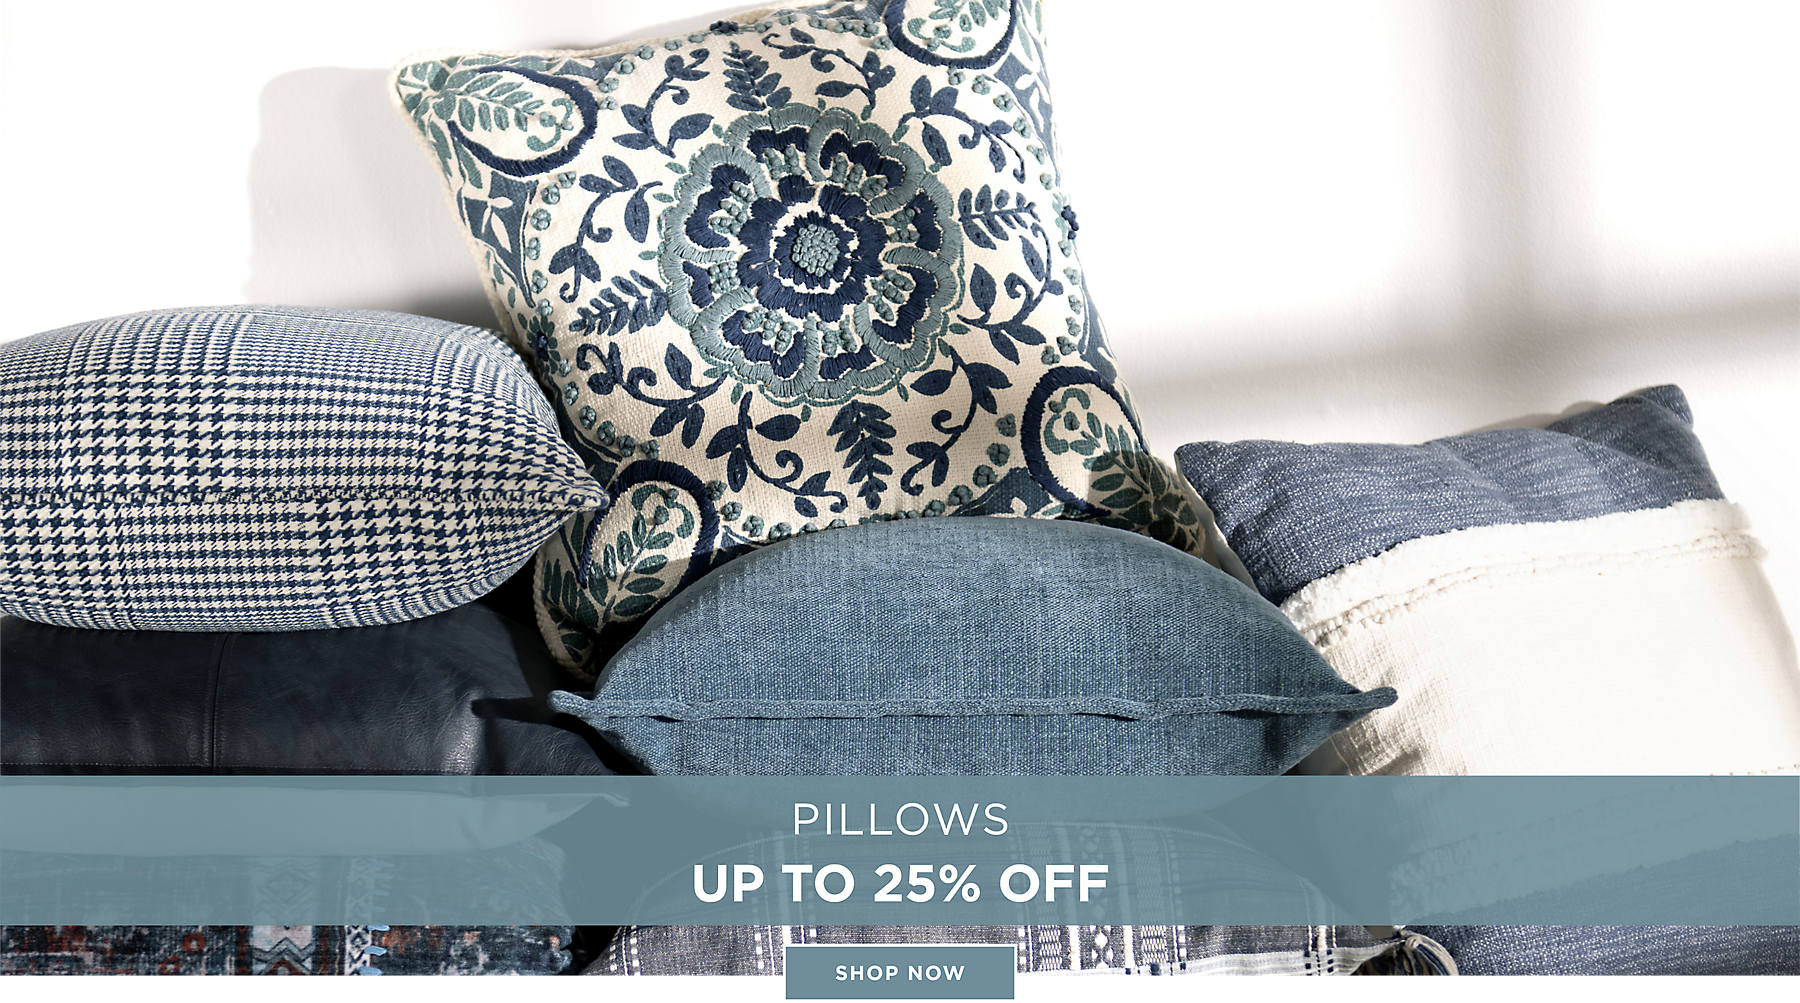 Pillows Up to 25% Off Shop Now